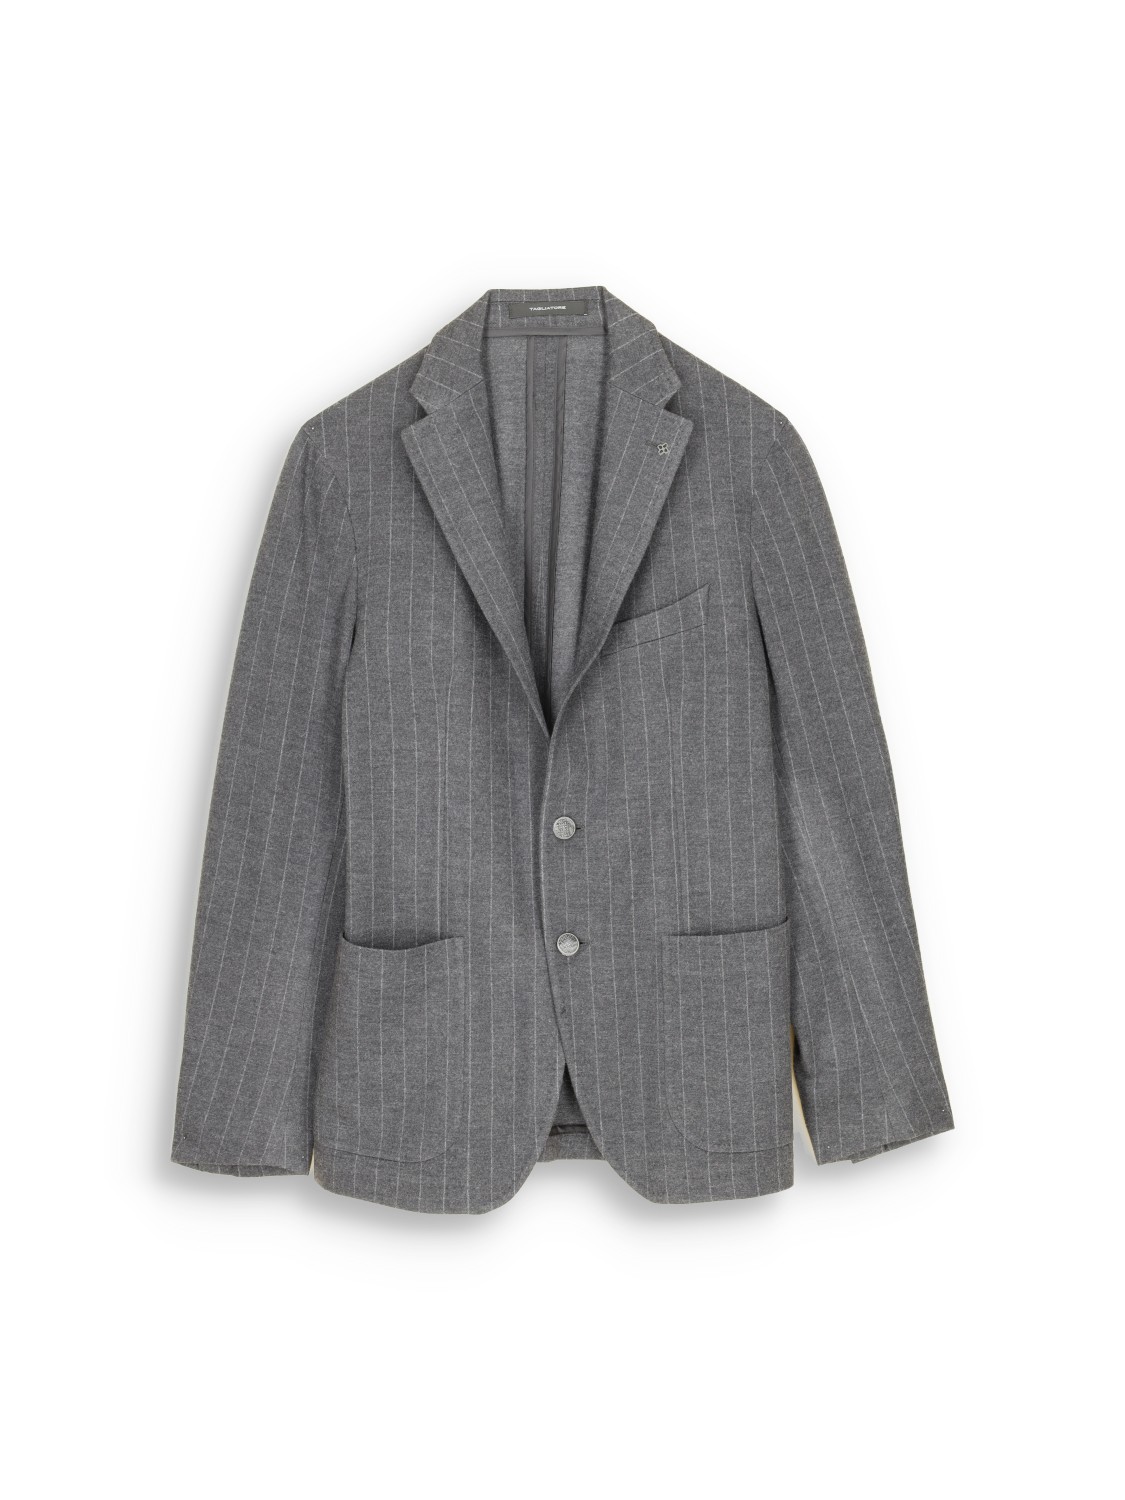 TAGLIATORE pinstripe suit with pure new wool - pinstripe suit made of virgin wool mix  grey 48